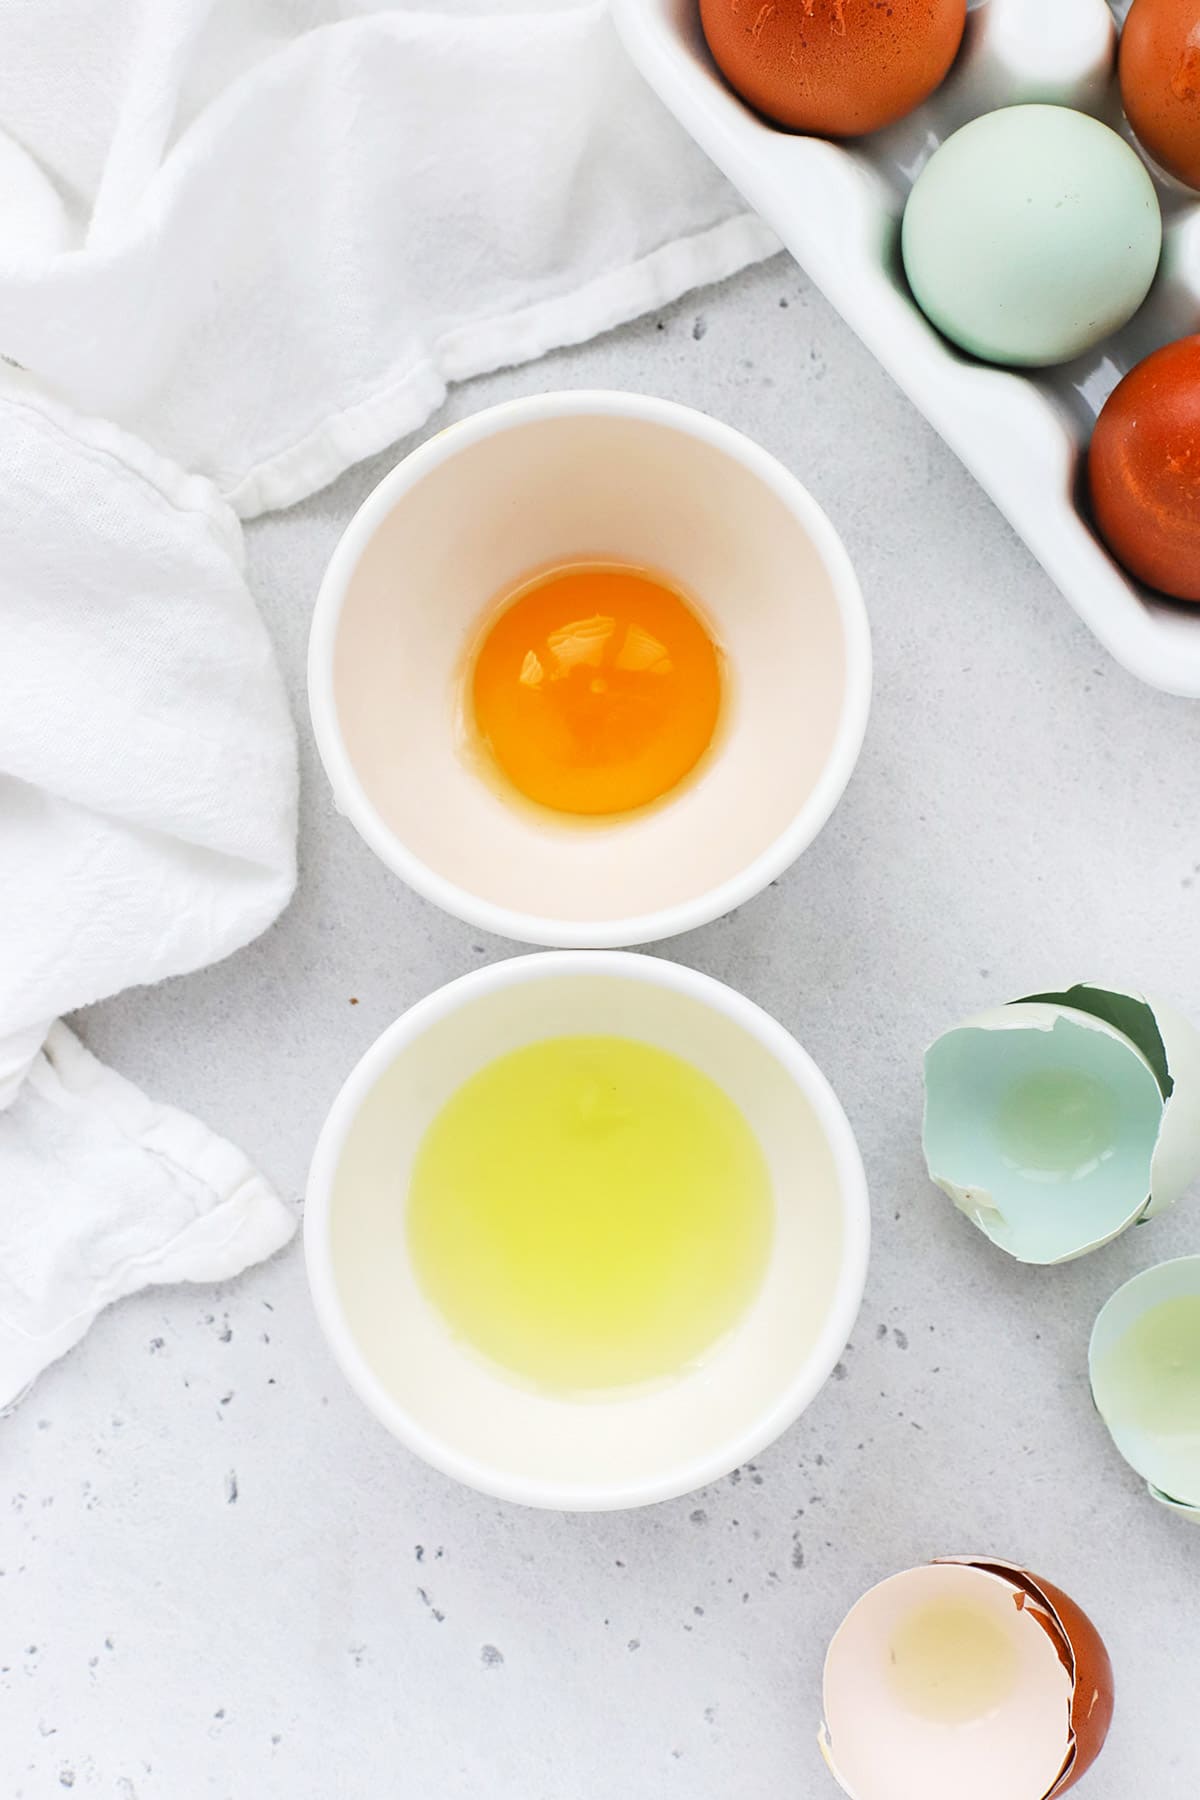 Overhead view of a separated egg, with the yolk in one bowl and the white in another bowl